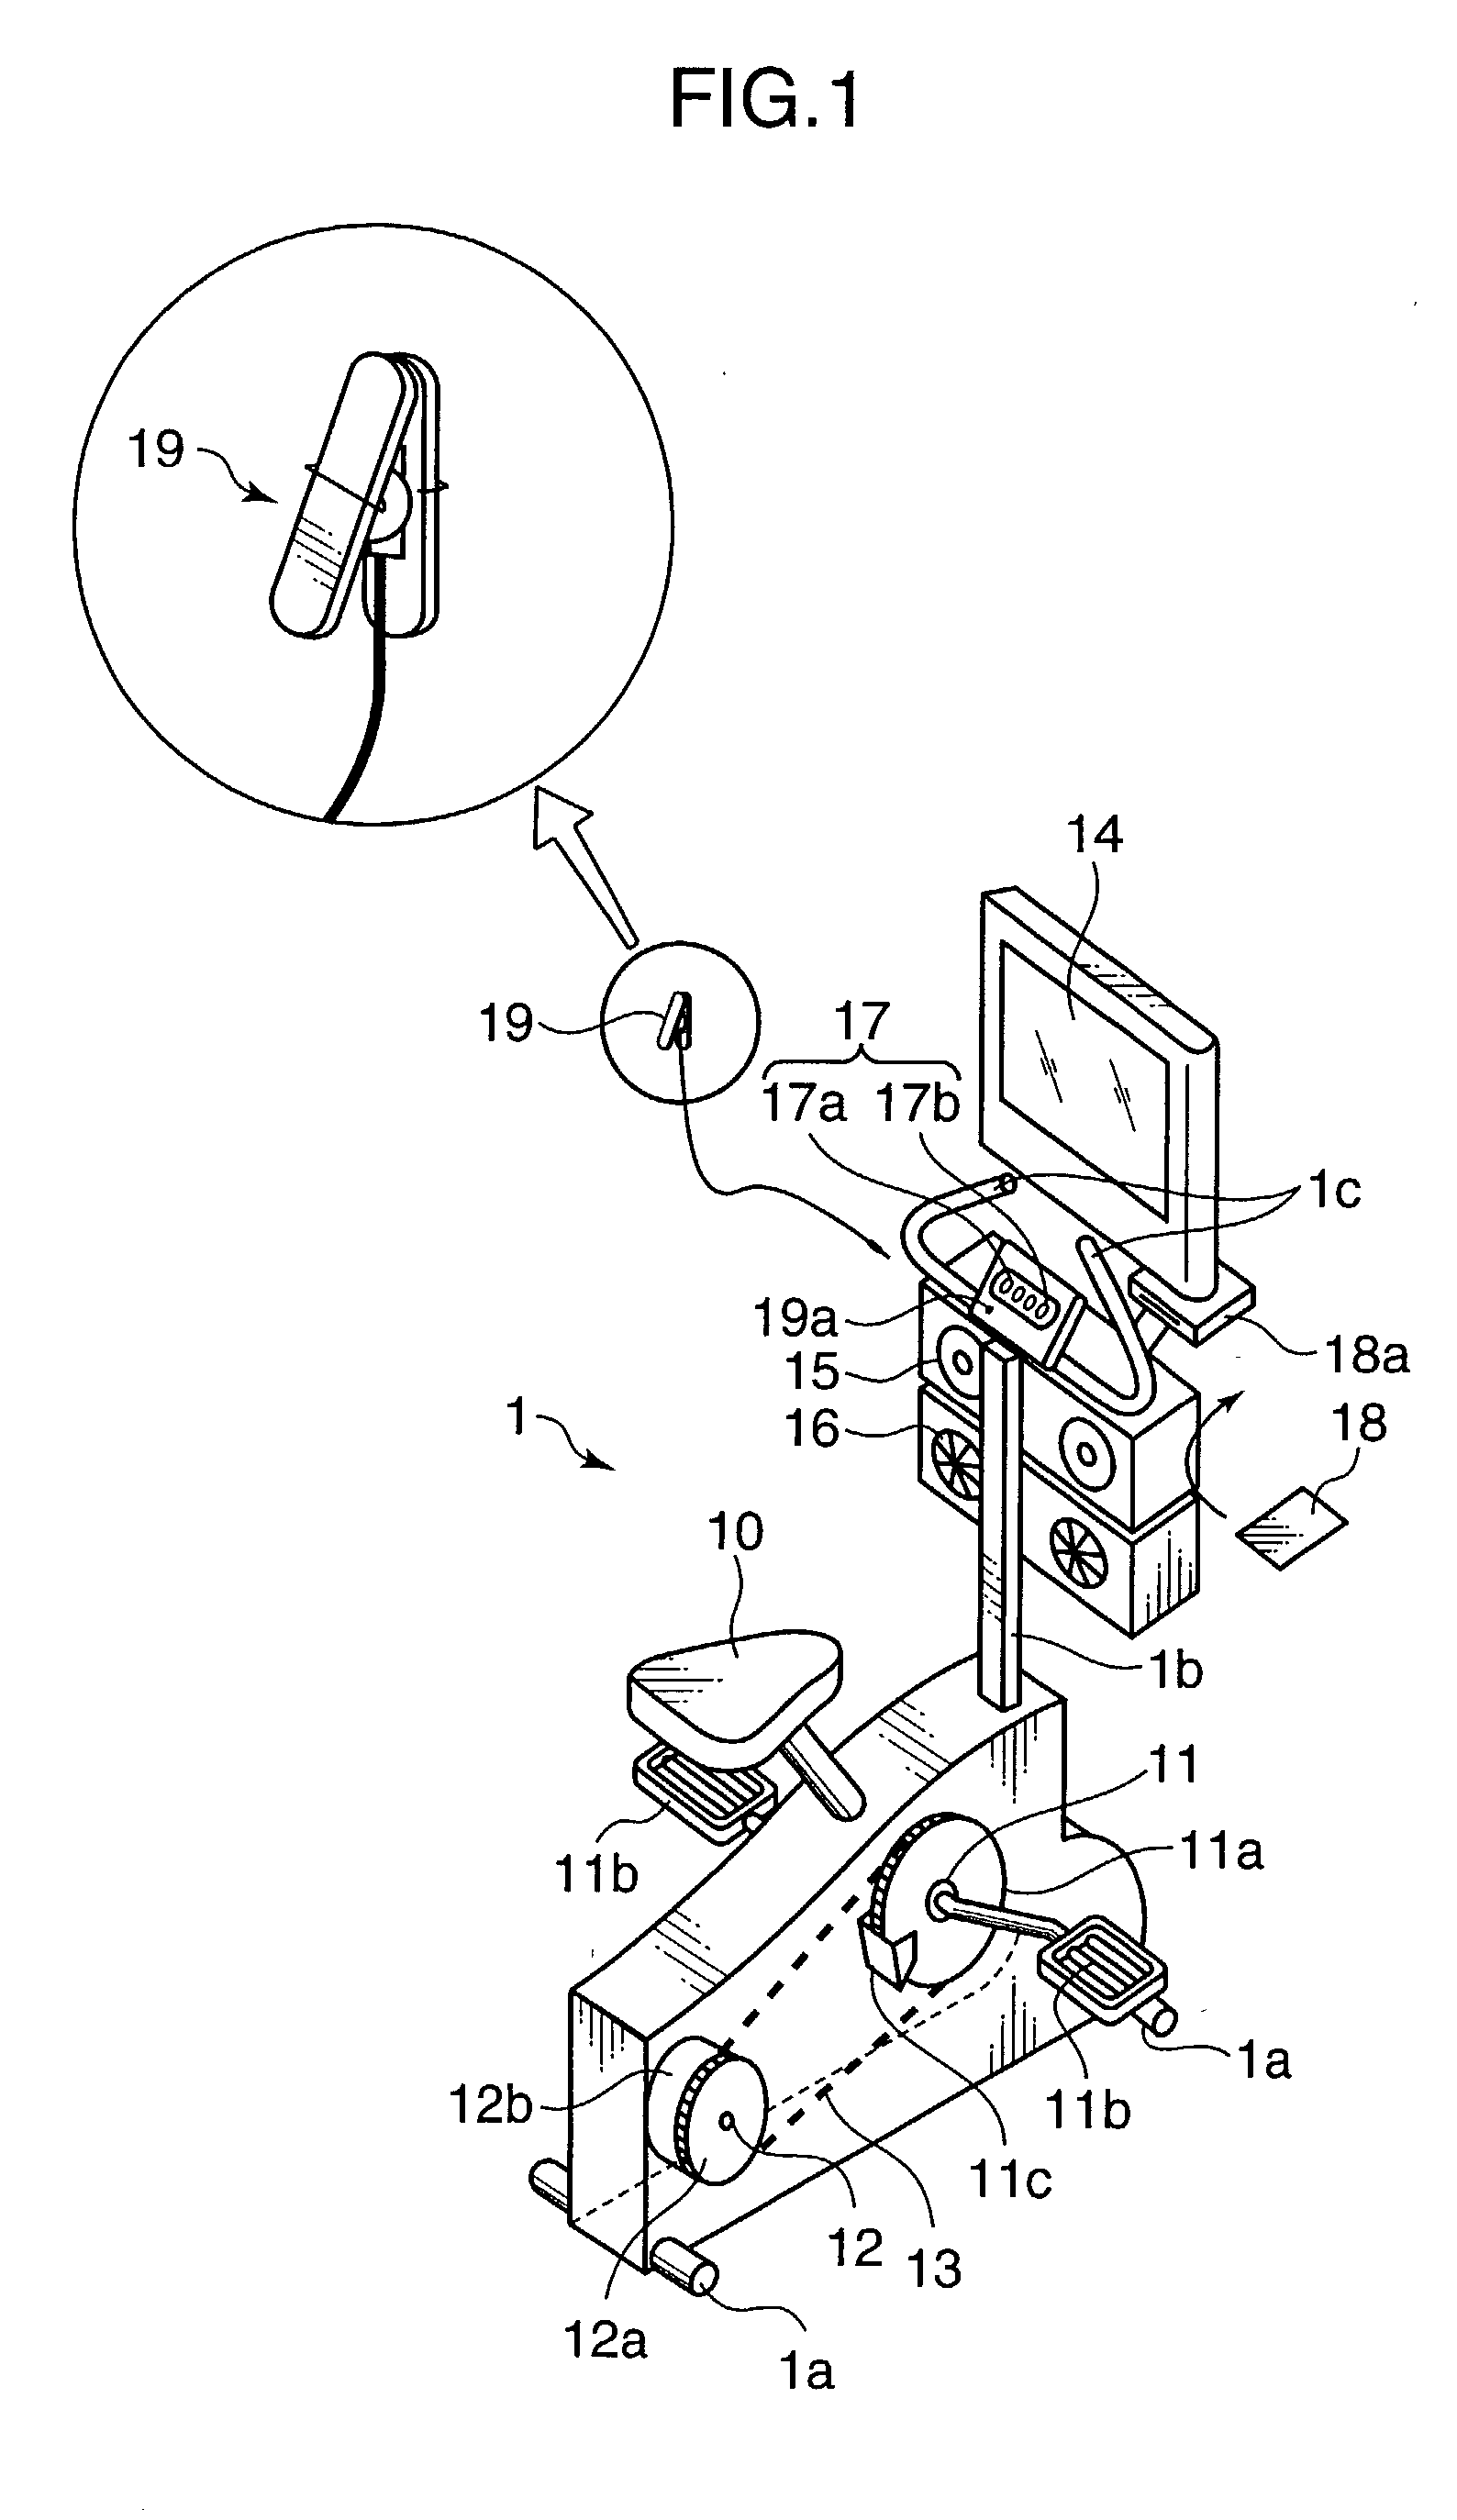 Exercise assisting method and apparatus implementing such method